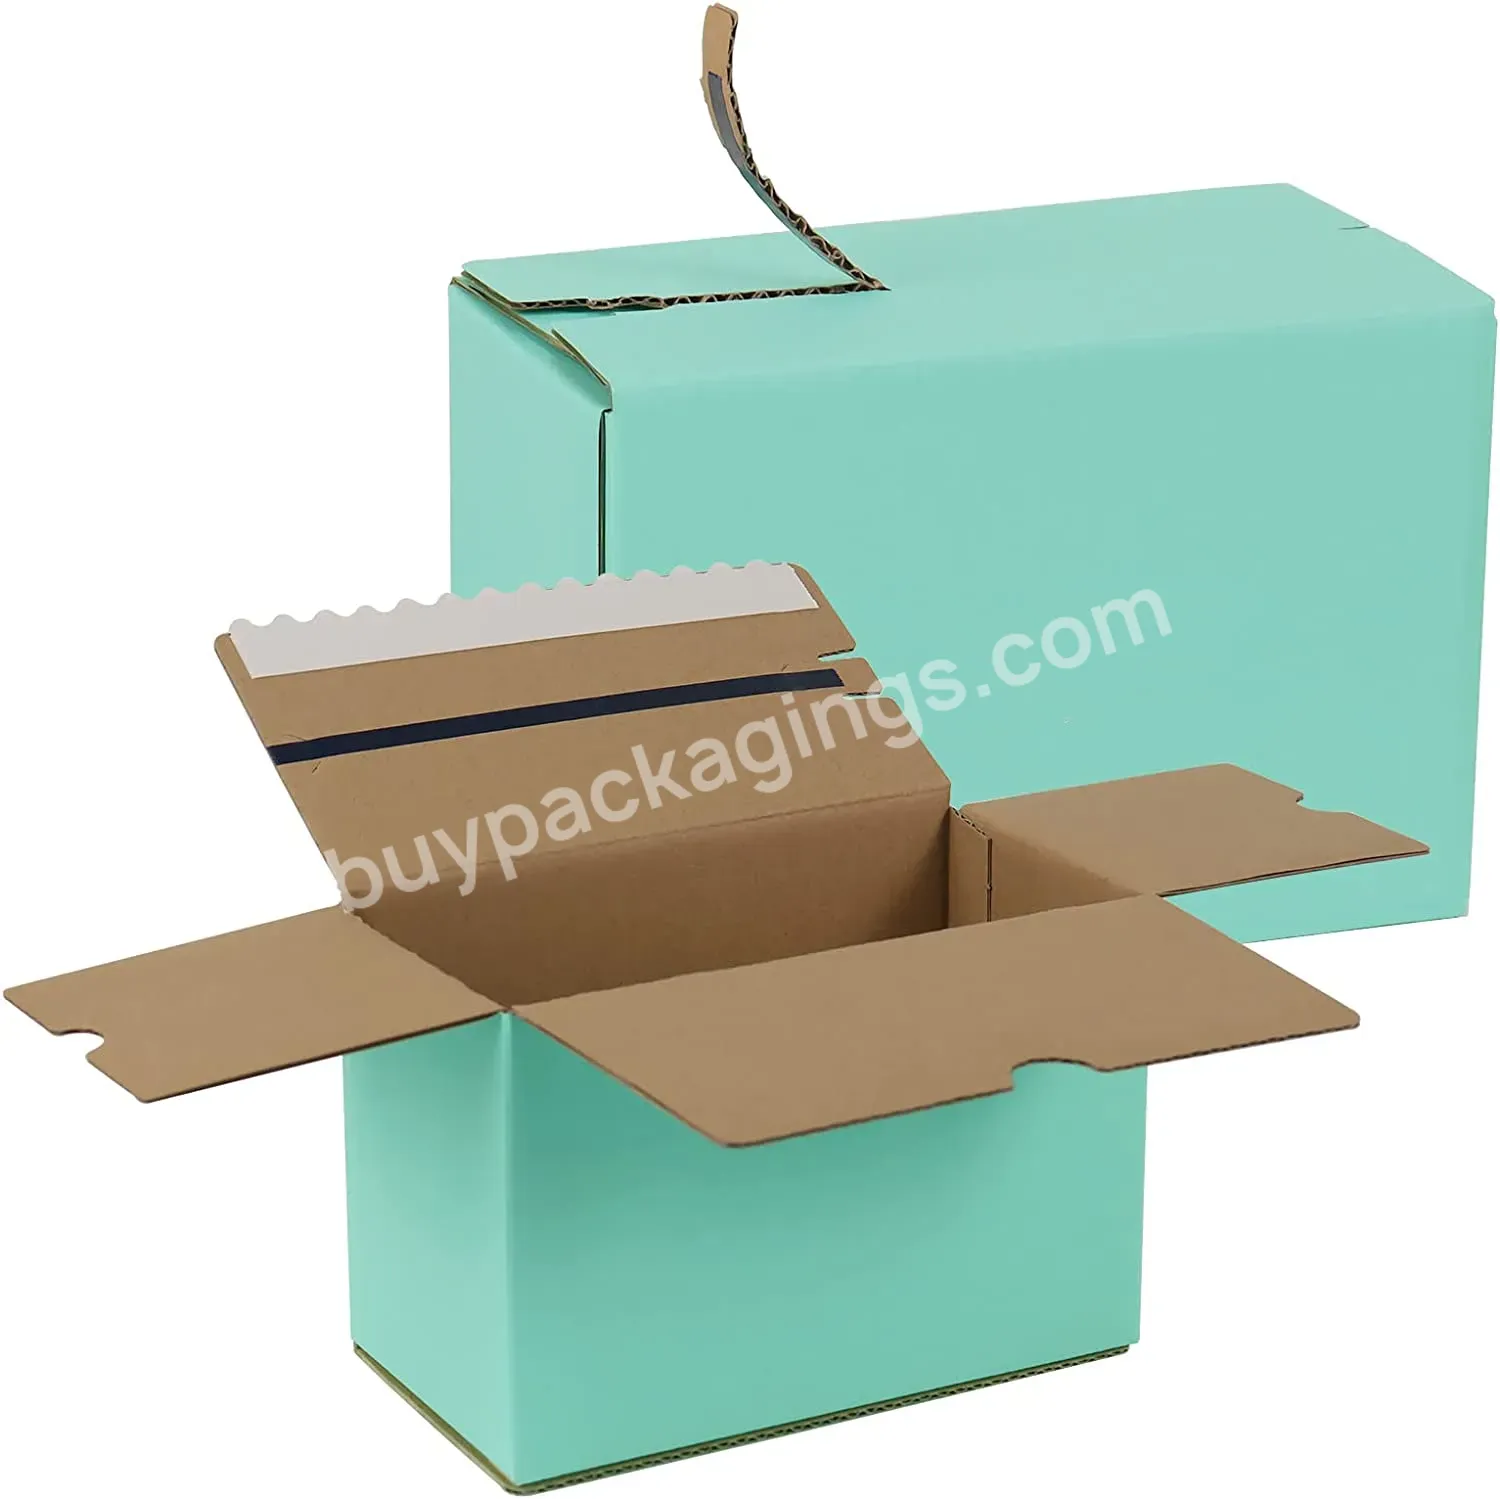 Green Wholesale Customize Logo Packaging Box Present Carton Paper Boxes With Zipper - Buy Zipper Mailing Box,Packing Boxes For Small Business,Cartoon Paper Box.